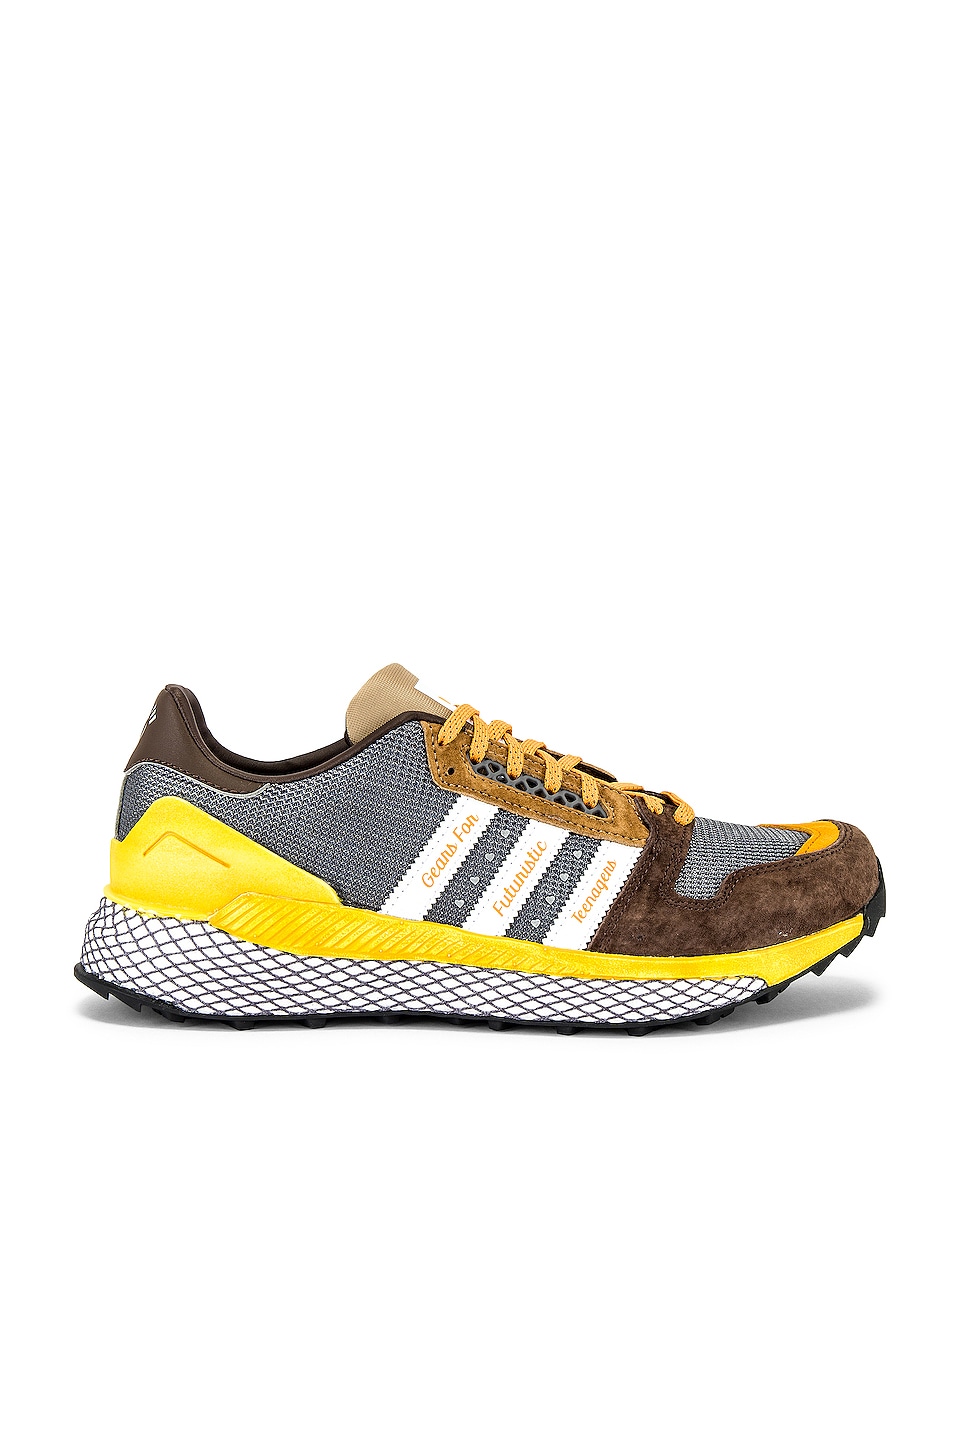 adidas x HUMAN MADE Quester Brown